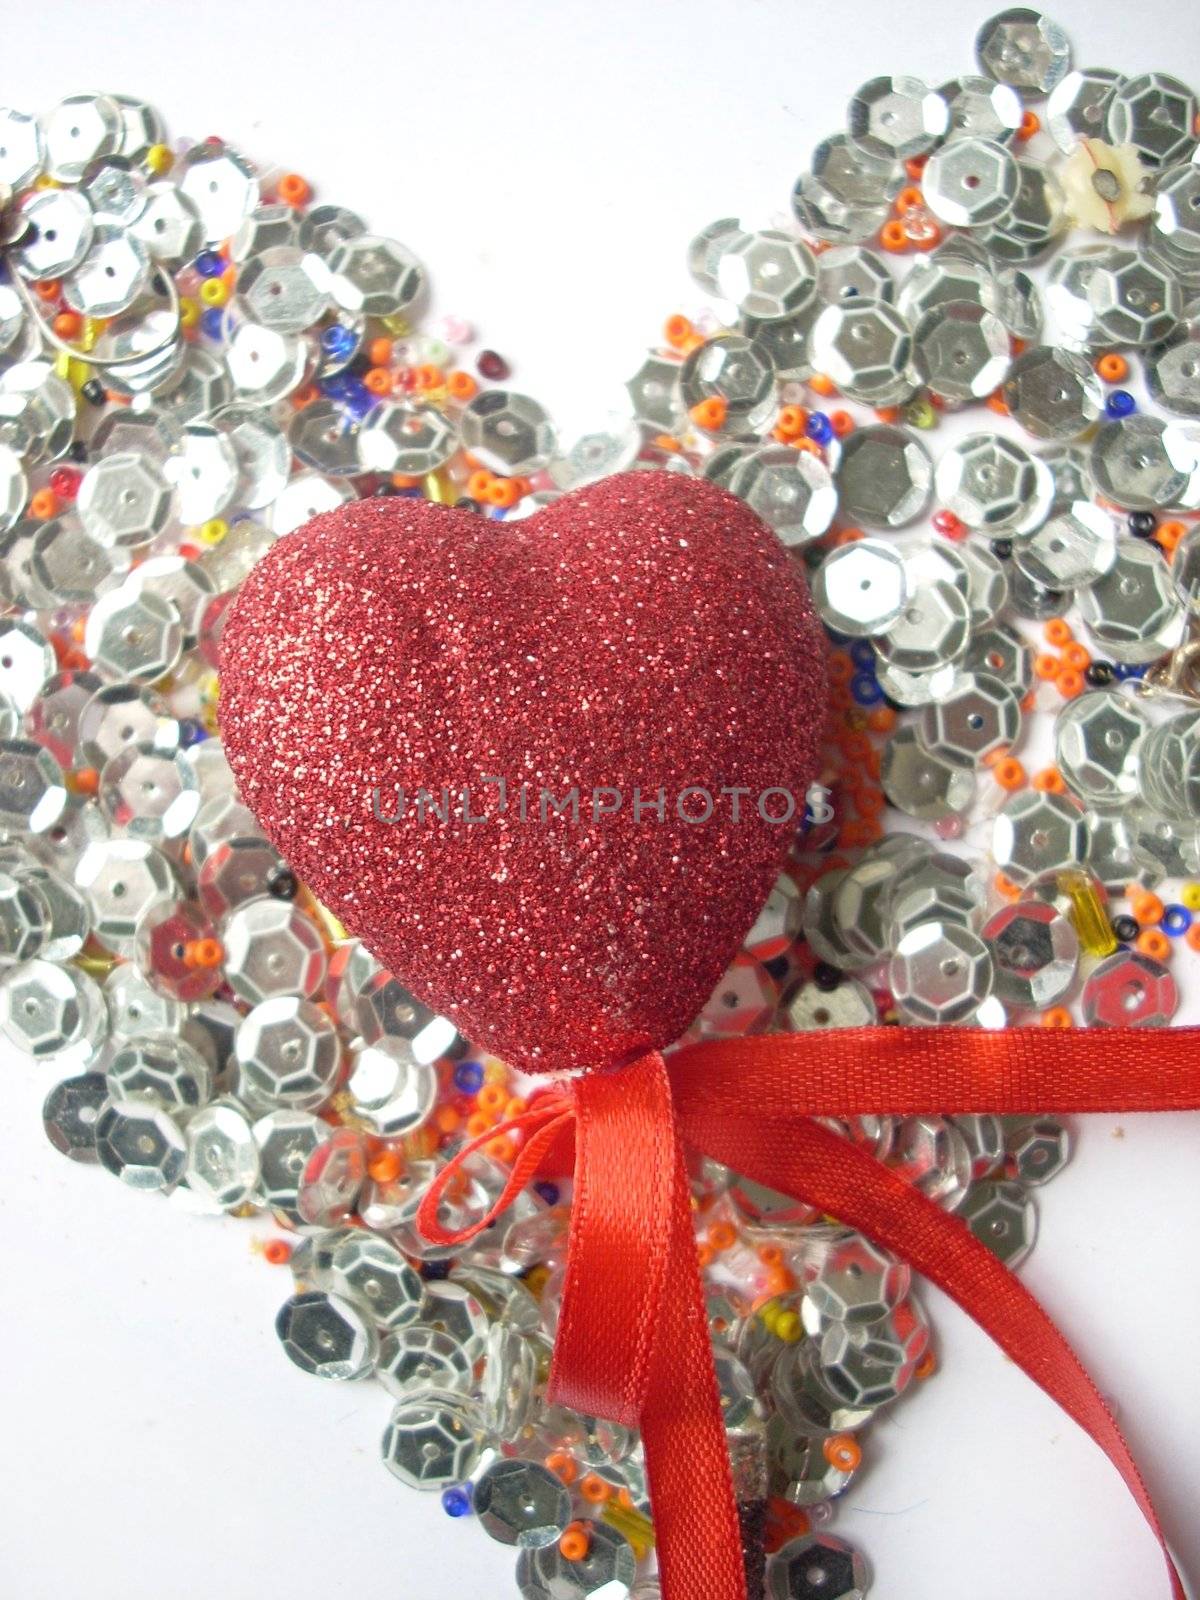 Shining glass beads texture and a heart